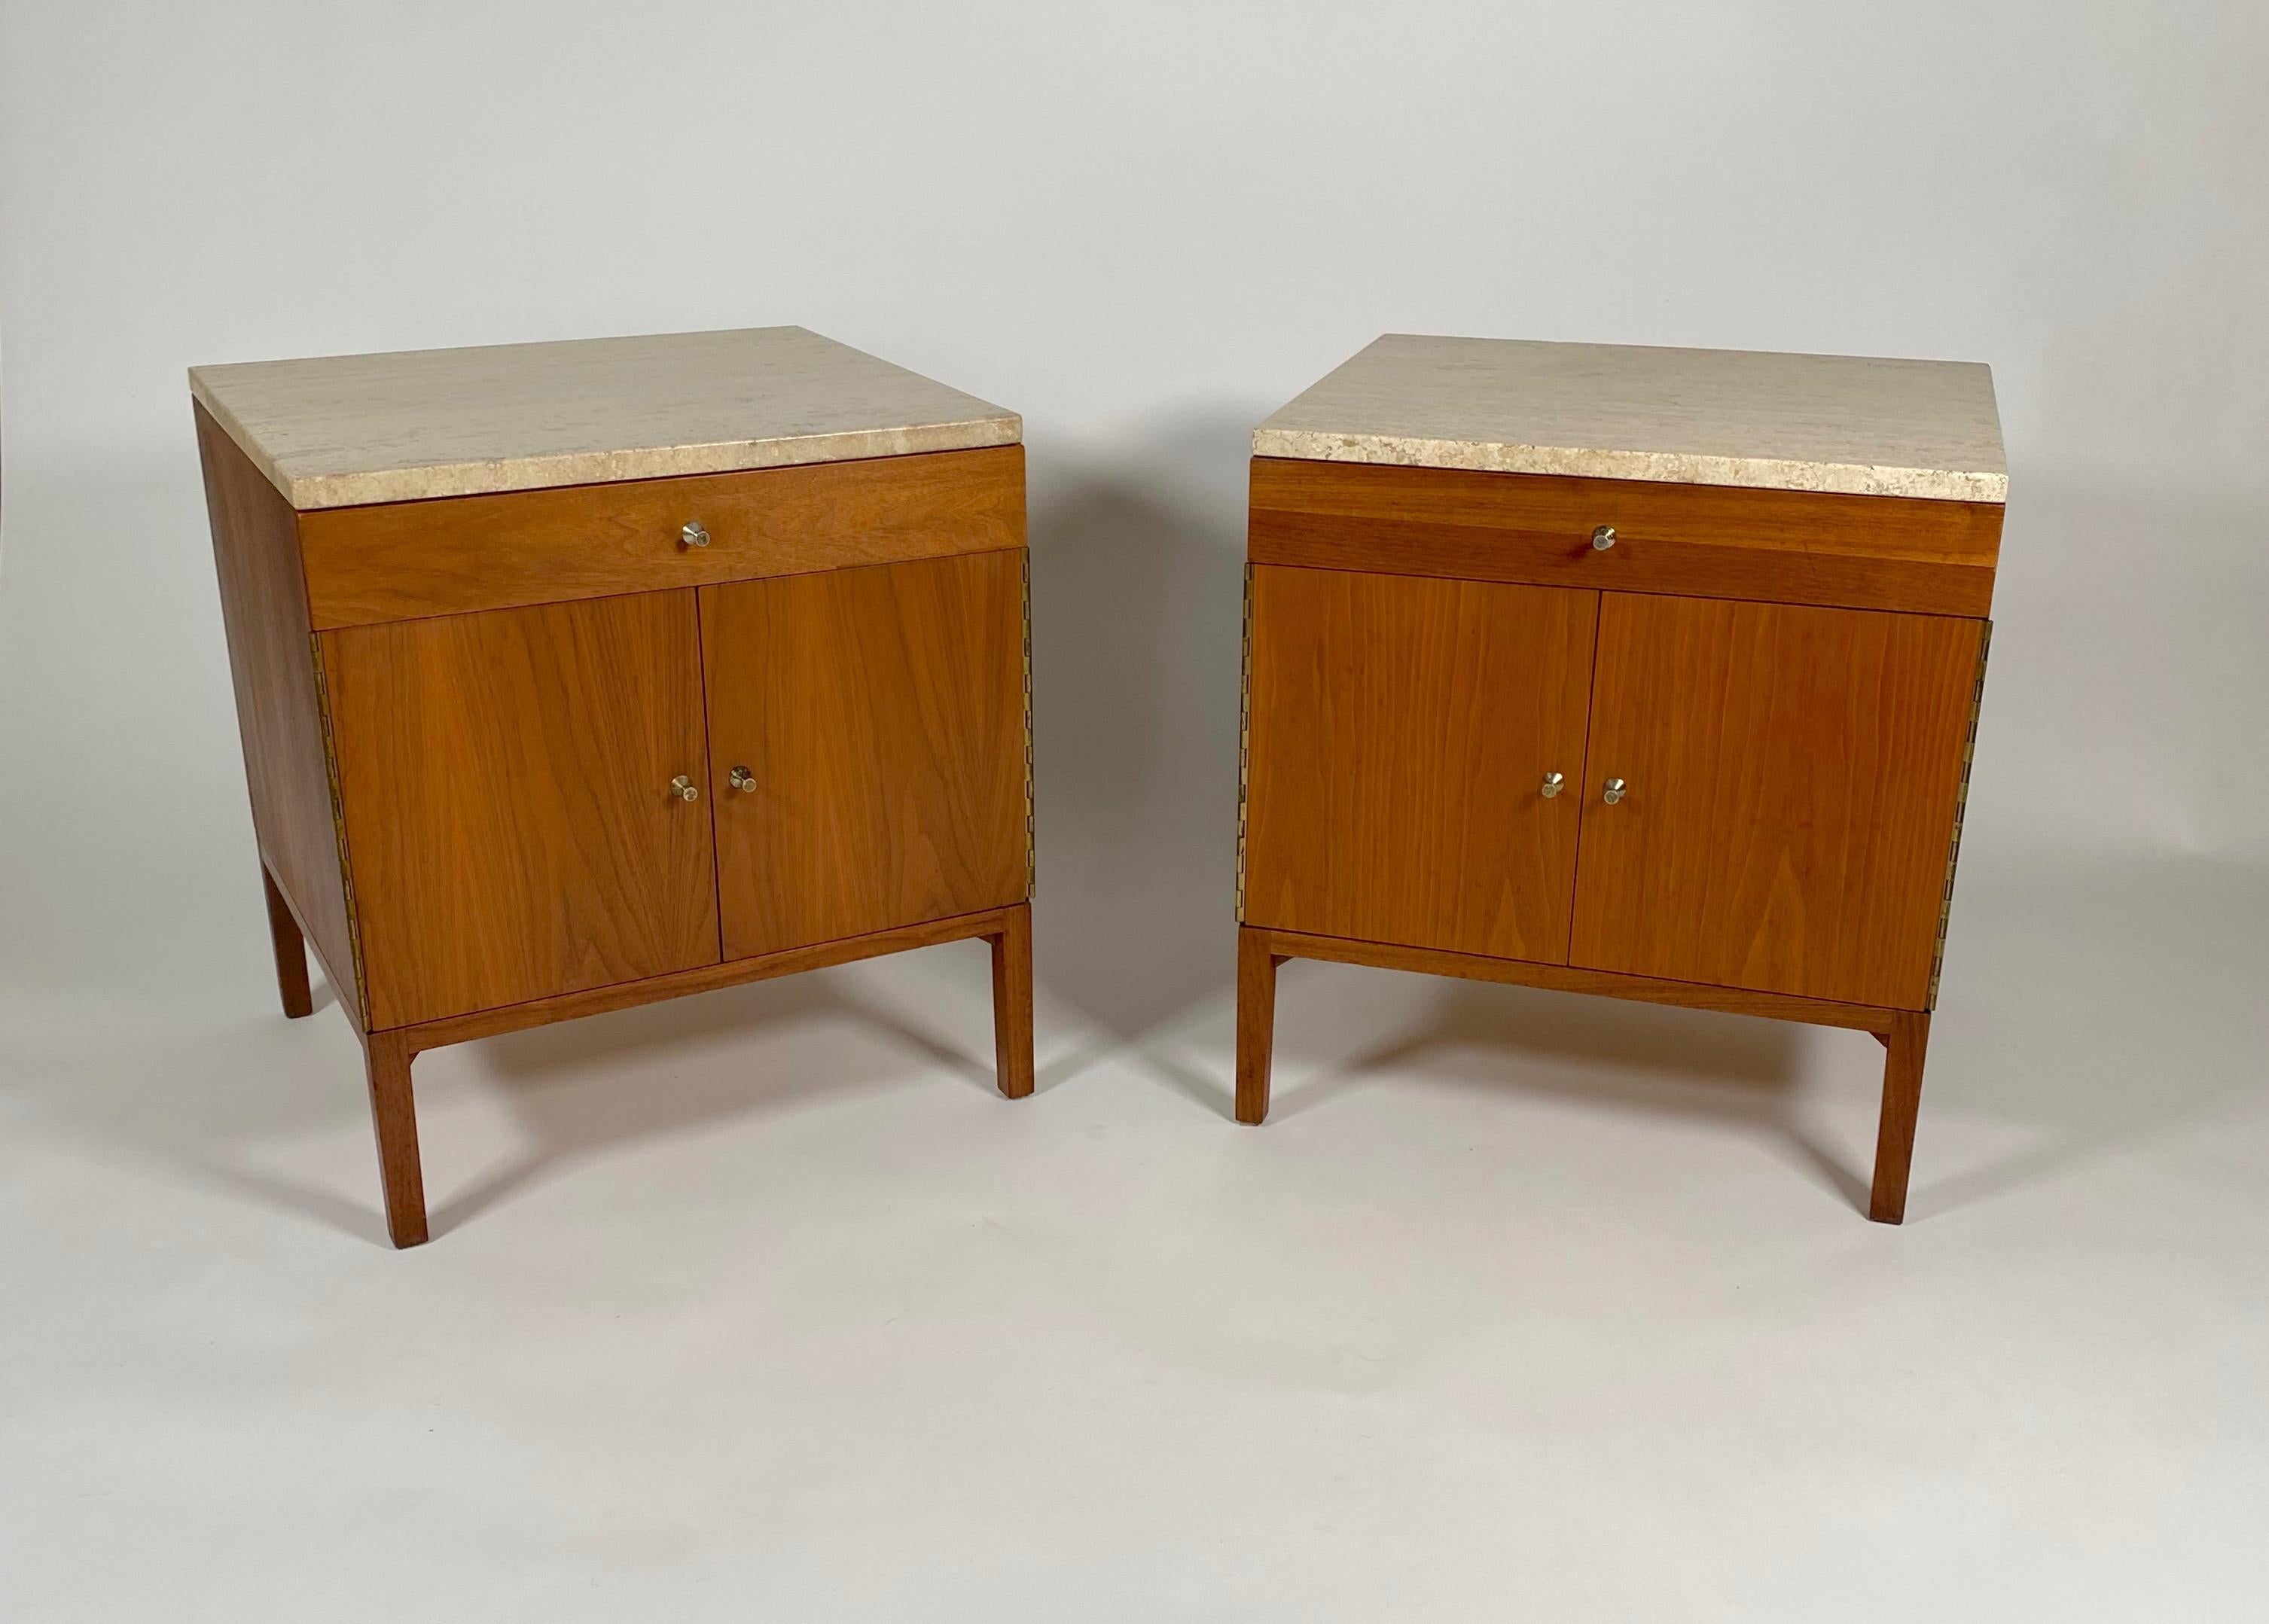 Pair of Paul McCobb for Calvin nightstands in walnut with travertine tops. Having shallow profile top drawers with a two door bottom cabinet with an adjustable shelf, conical pulls on the drawers and doors. The walnut has a rich color and a